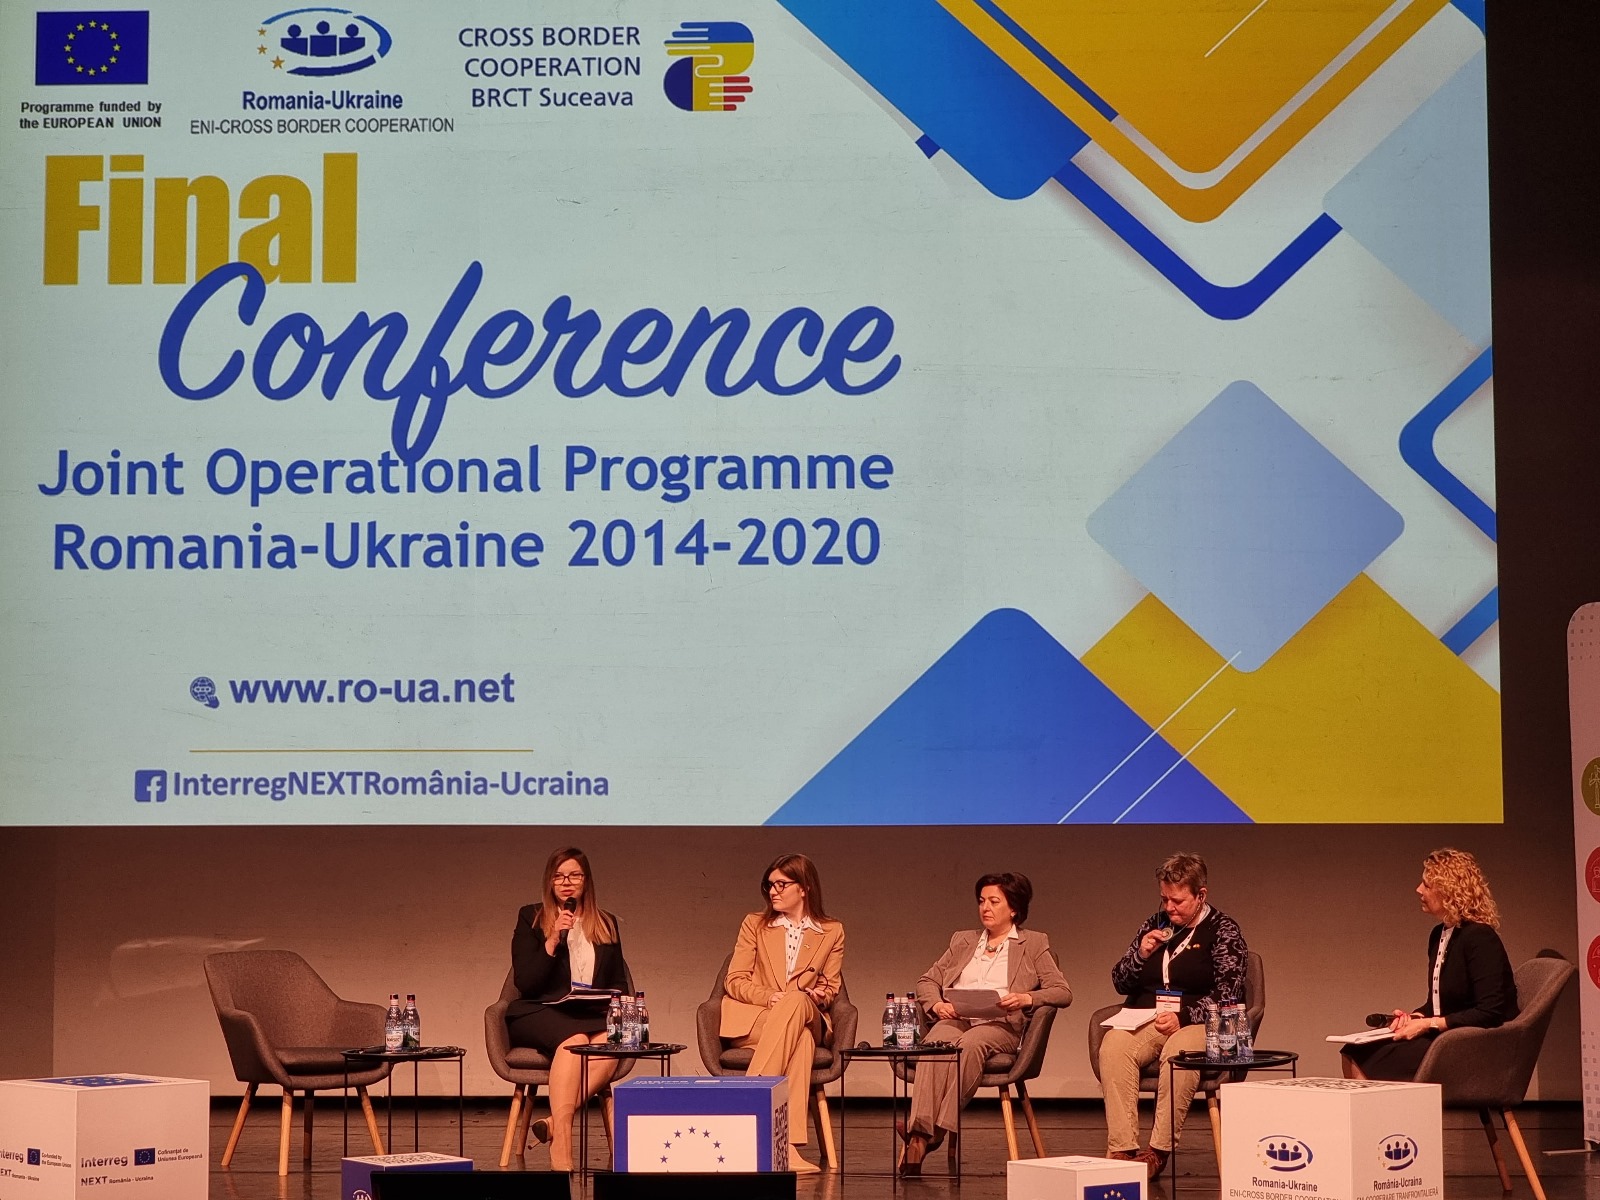 Achievements of cooperation with Ukraine in the final conference...